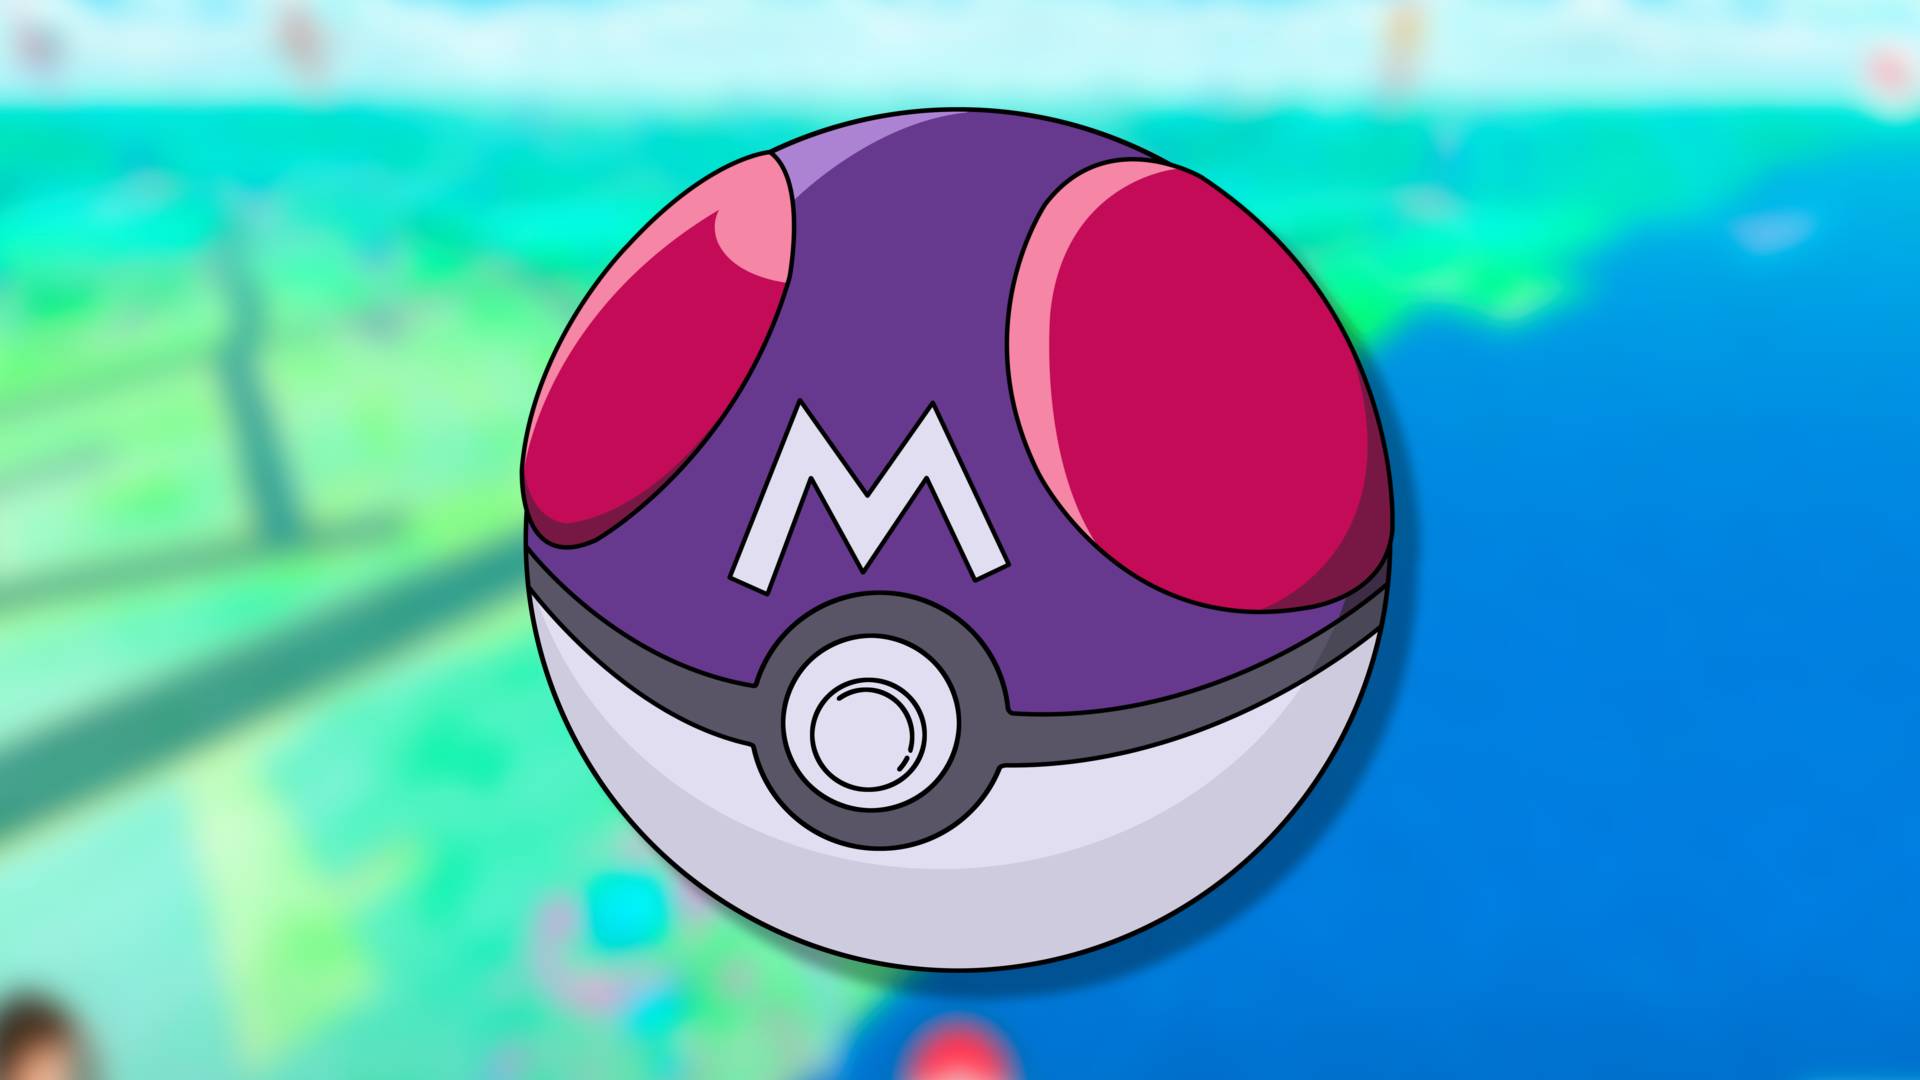 Pokemon Let's Go: Which Pokemon To Use Your Master Ball On